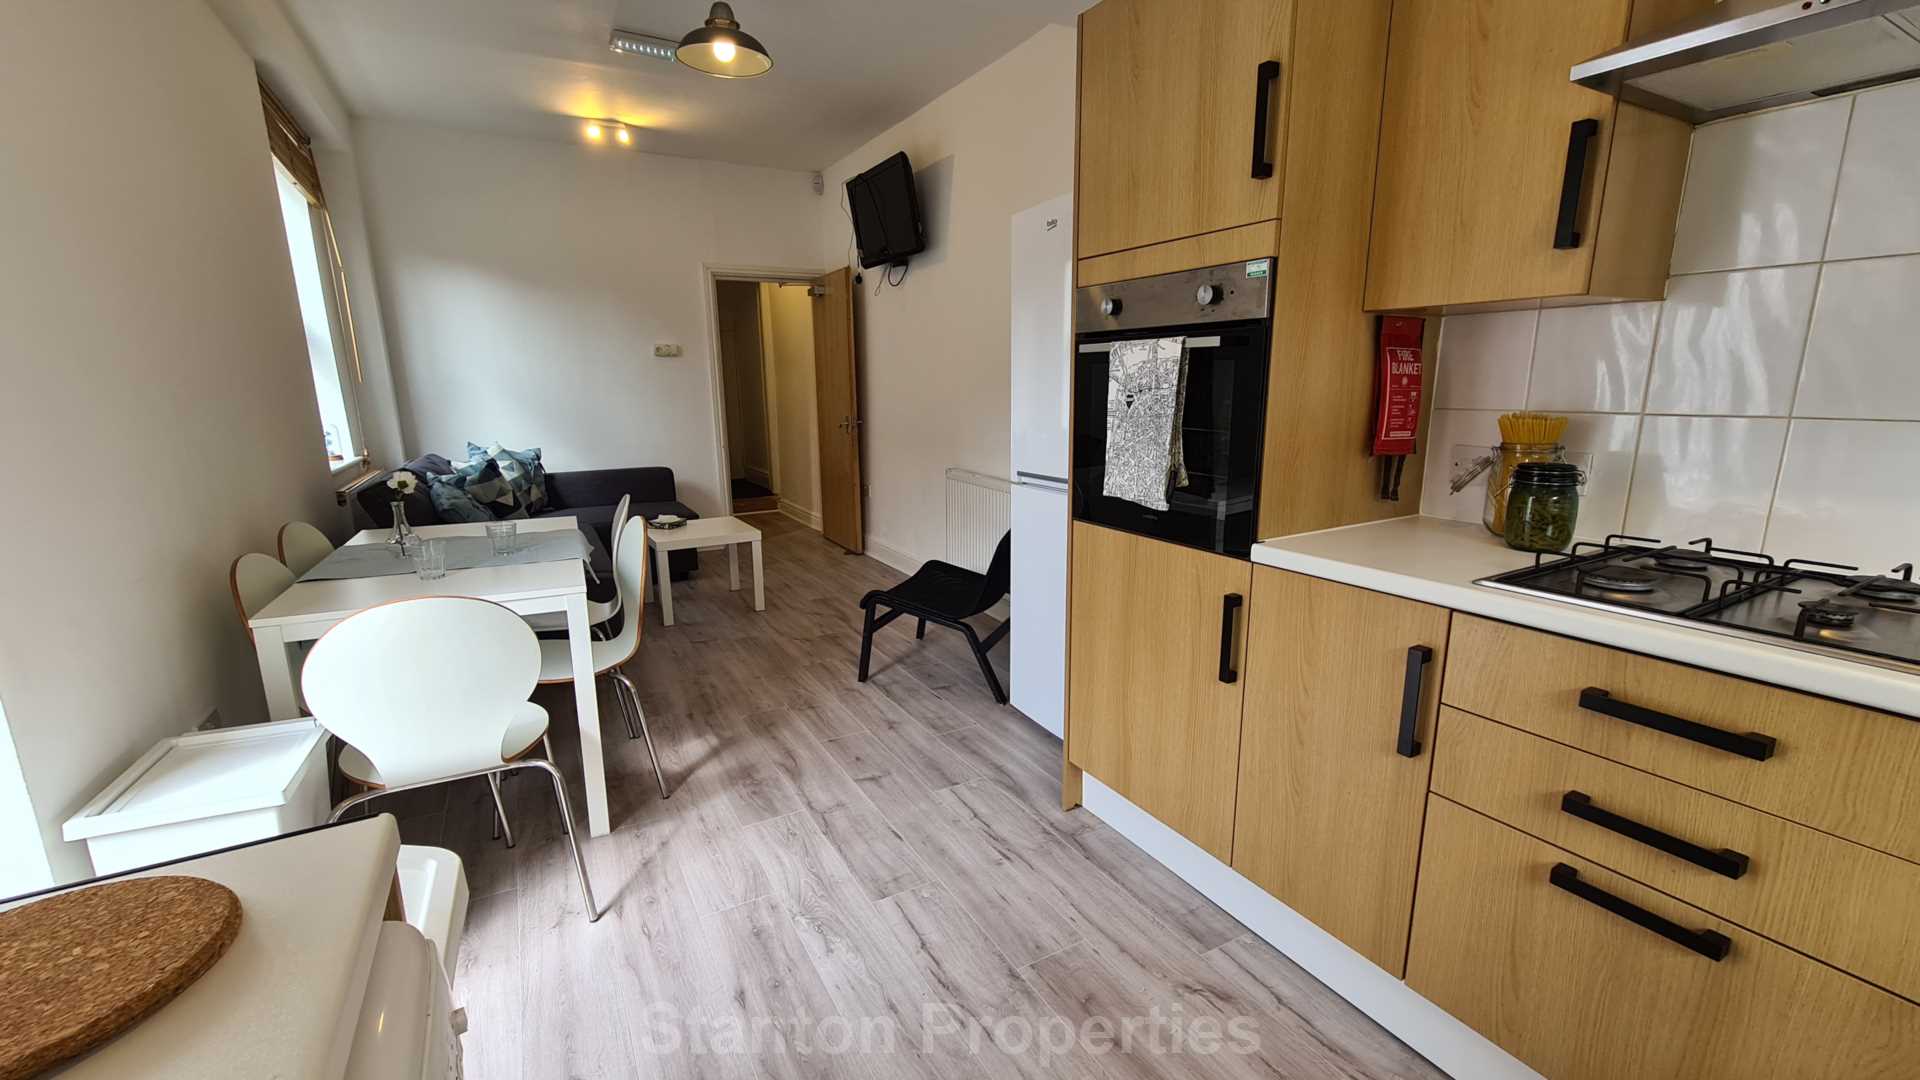 £120 pppw, See Video Tour, Mabfield Road, Manchester, Image 3